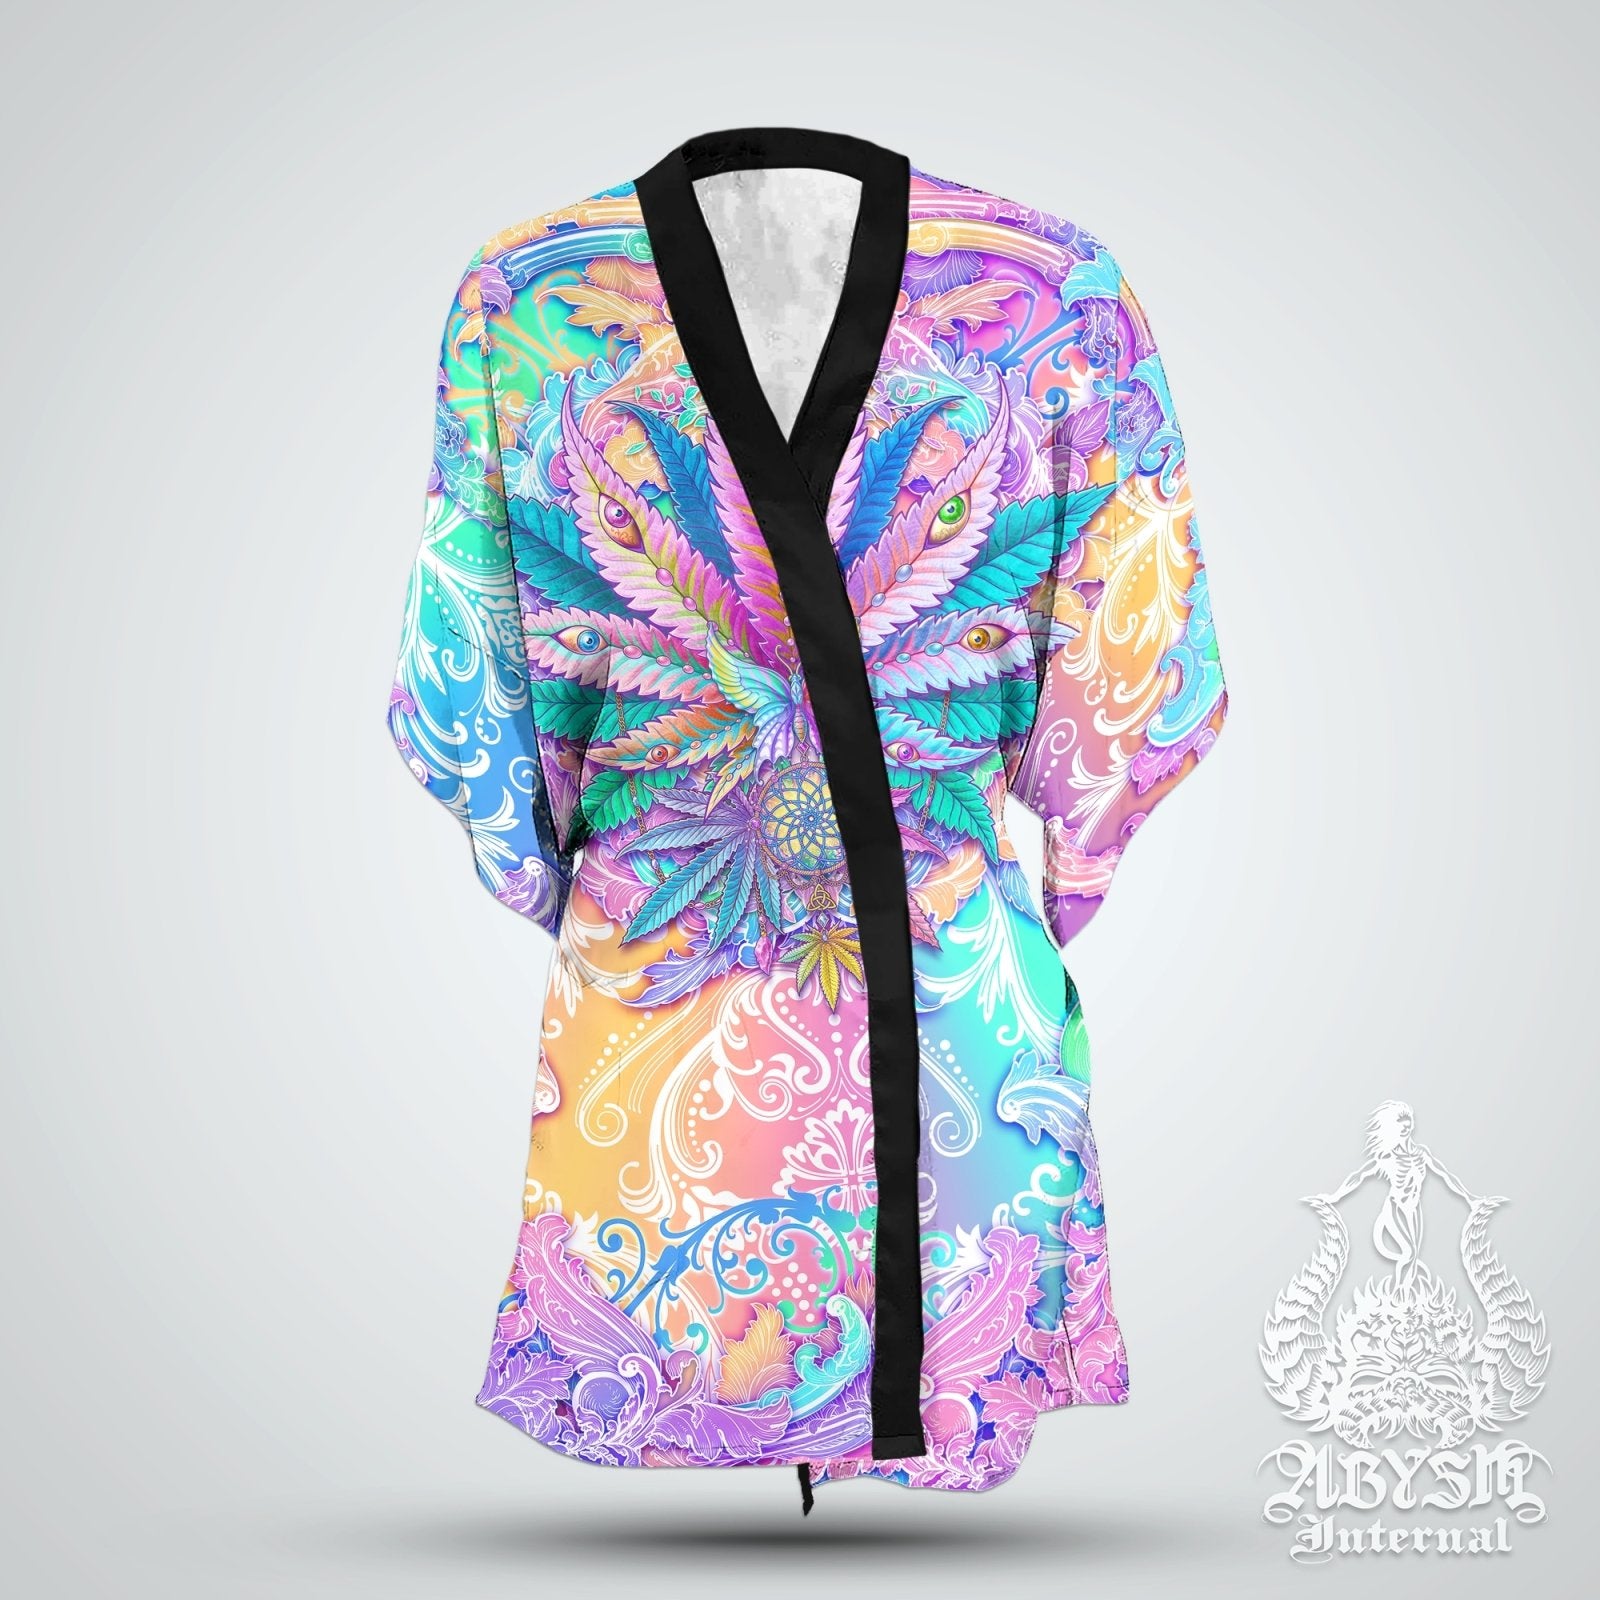 Cannabis Cover Up, Weed Outfit, Pastel Party Kimono, Aesthetic Summer Festival Robe, 420 Gift, Indie Clothing, Unisex - Marijuana - Abysm Internal